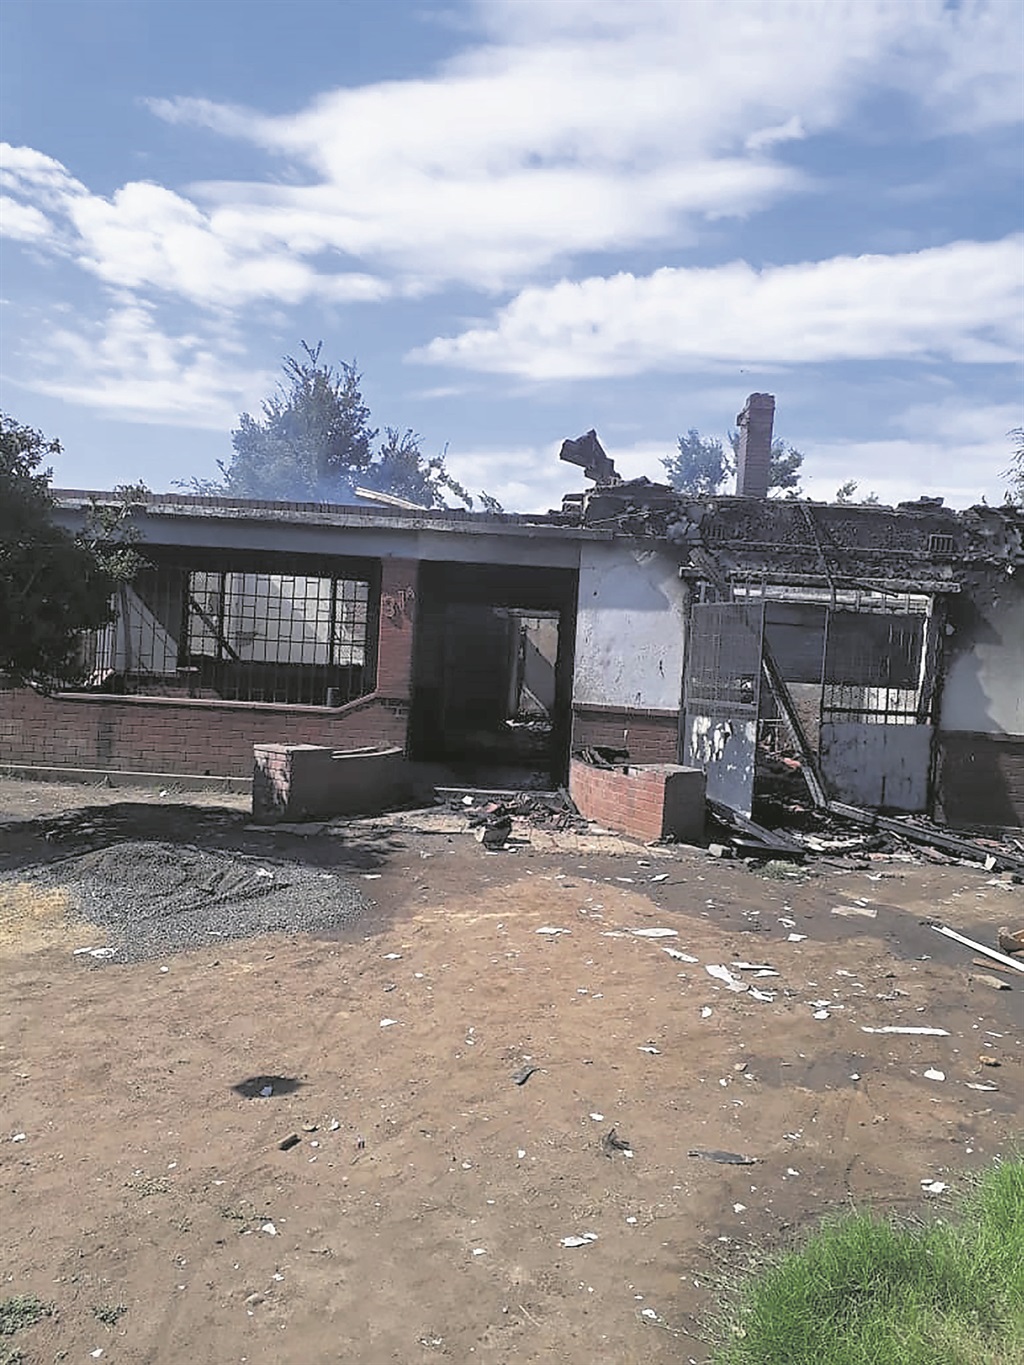 Residents went on a rampage following the death of a prominent tavern owner.